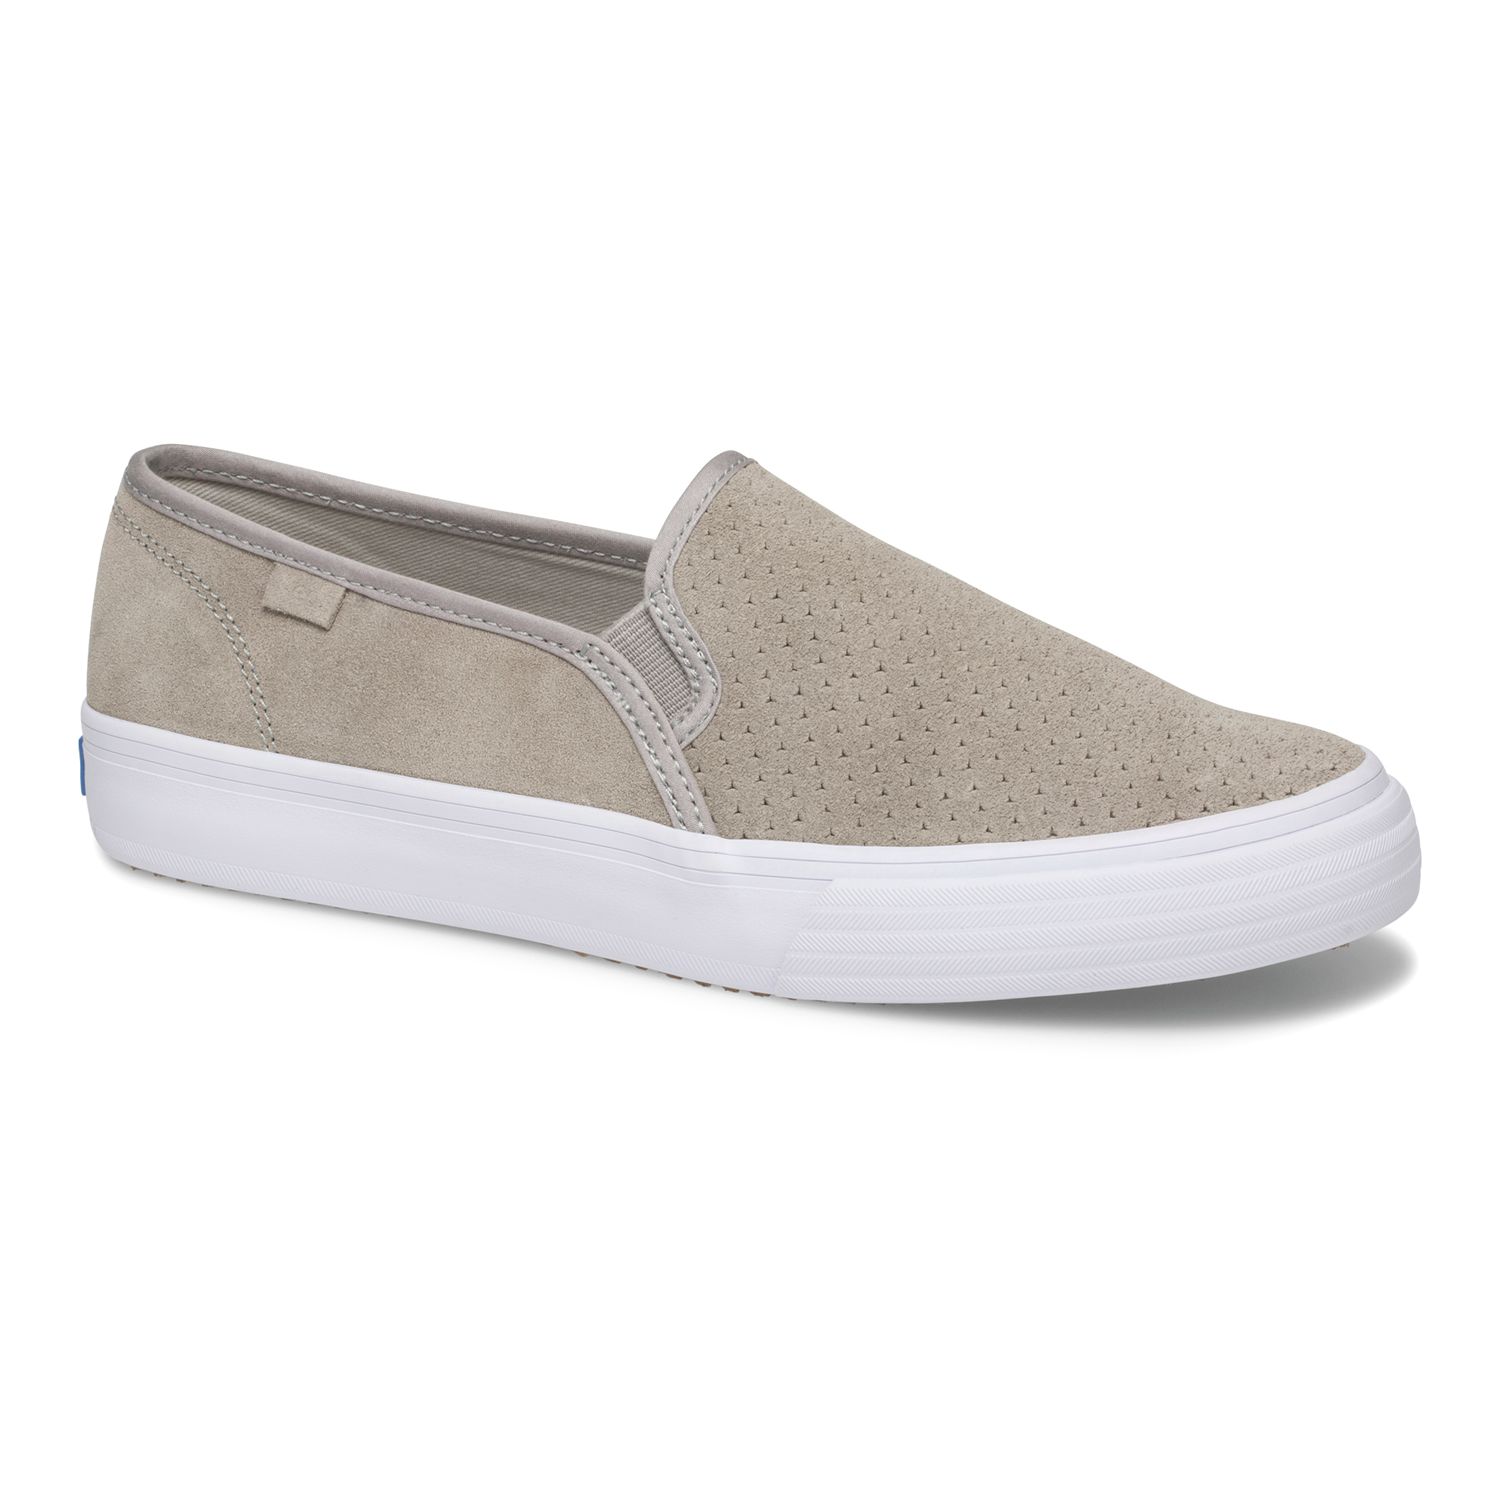 Keds Double Decker Perforated Suede 